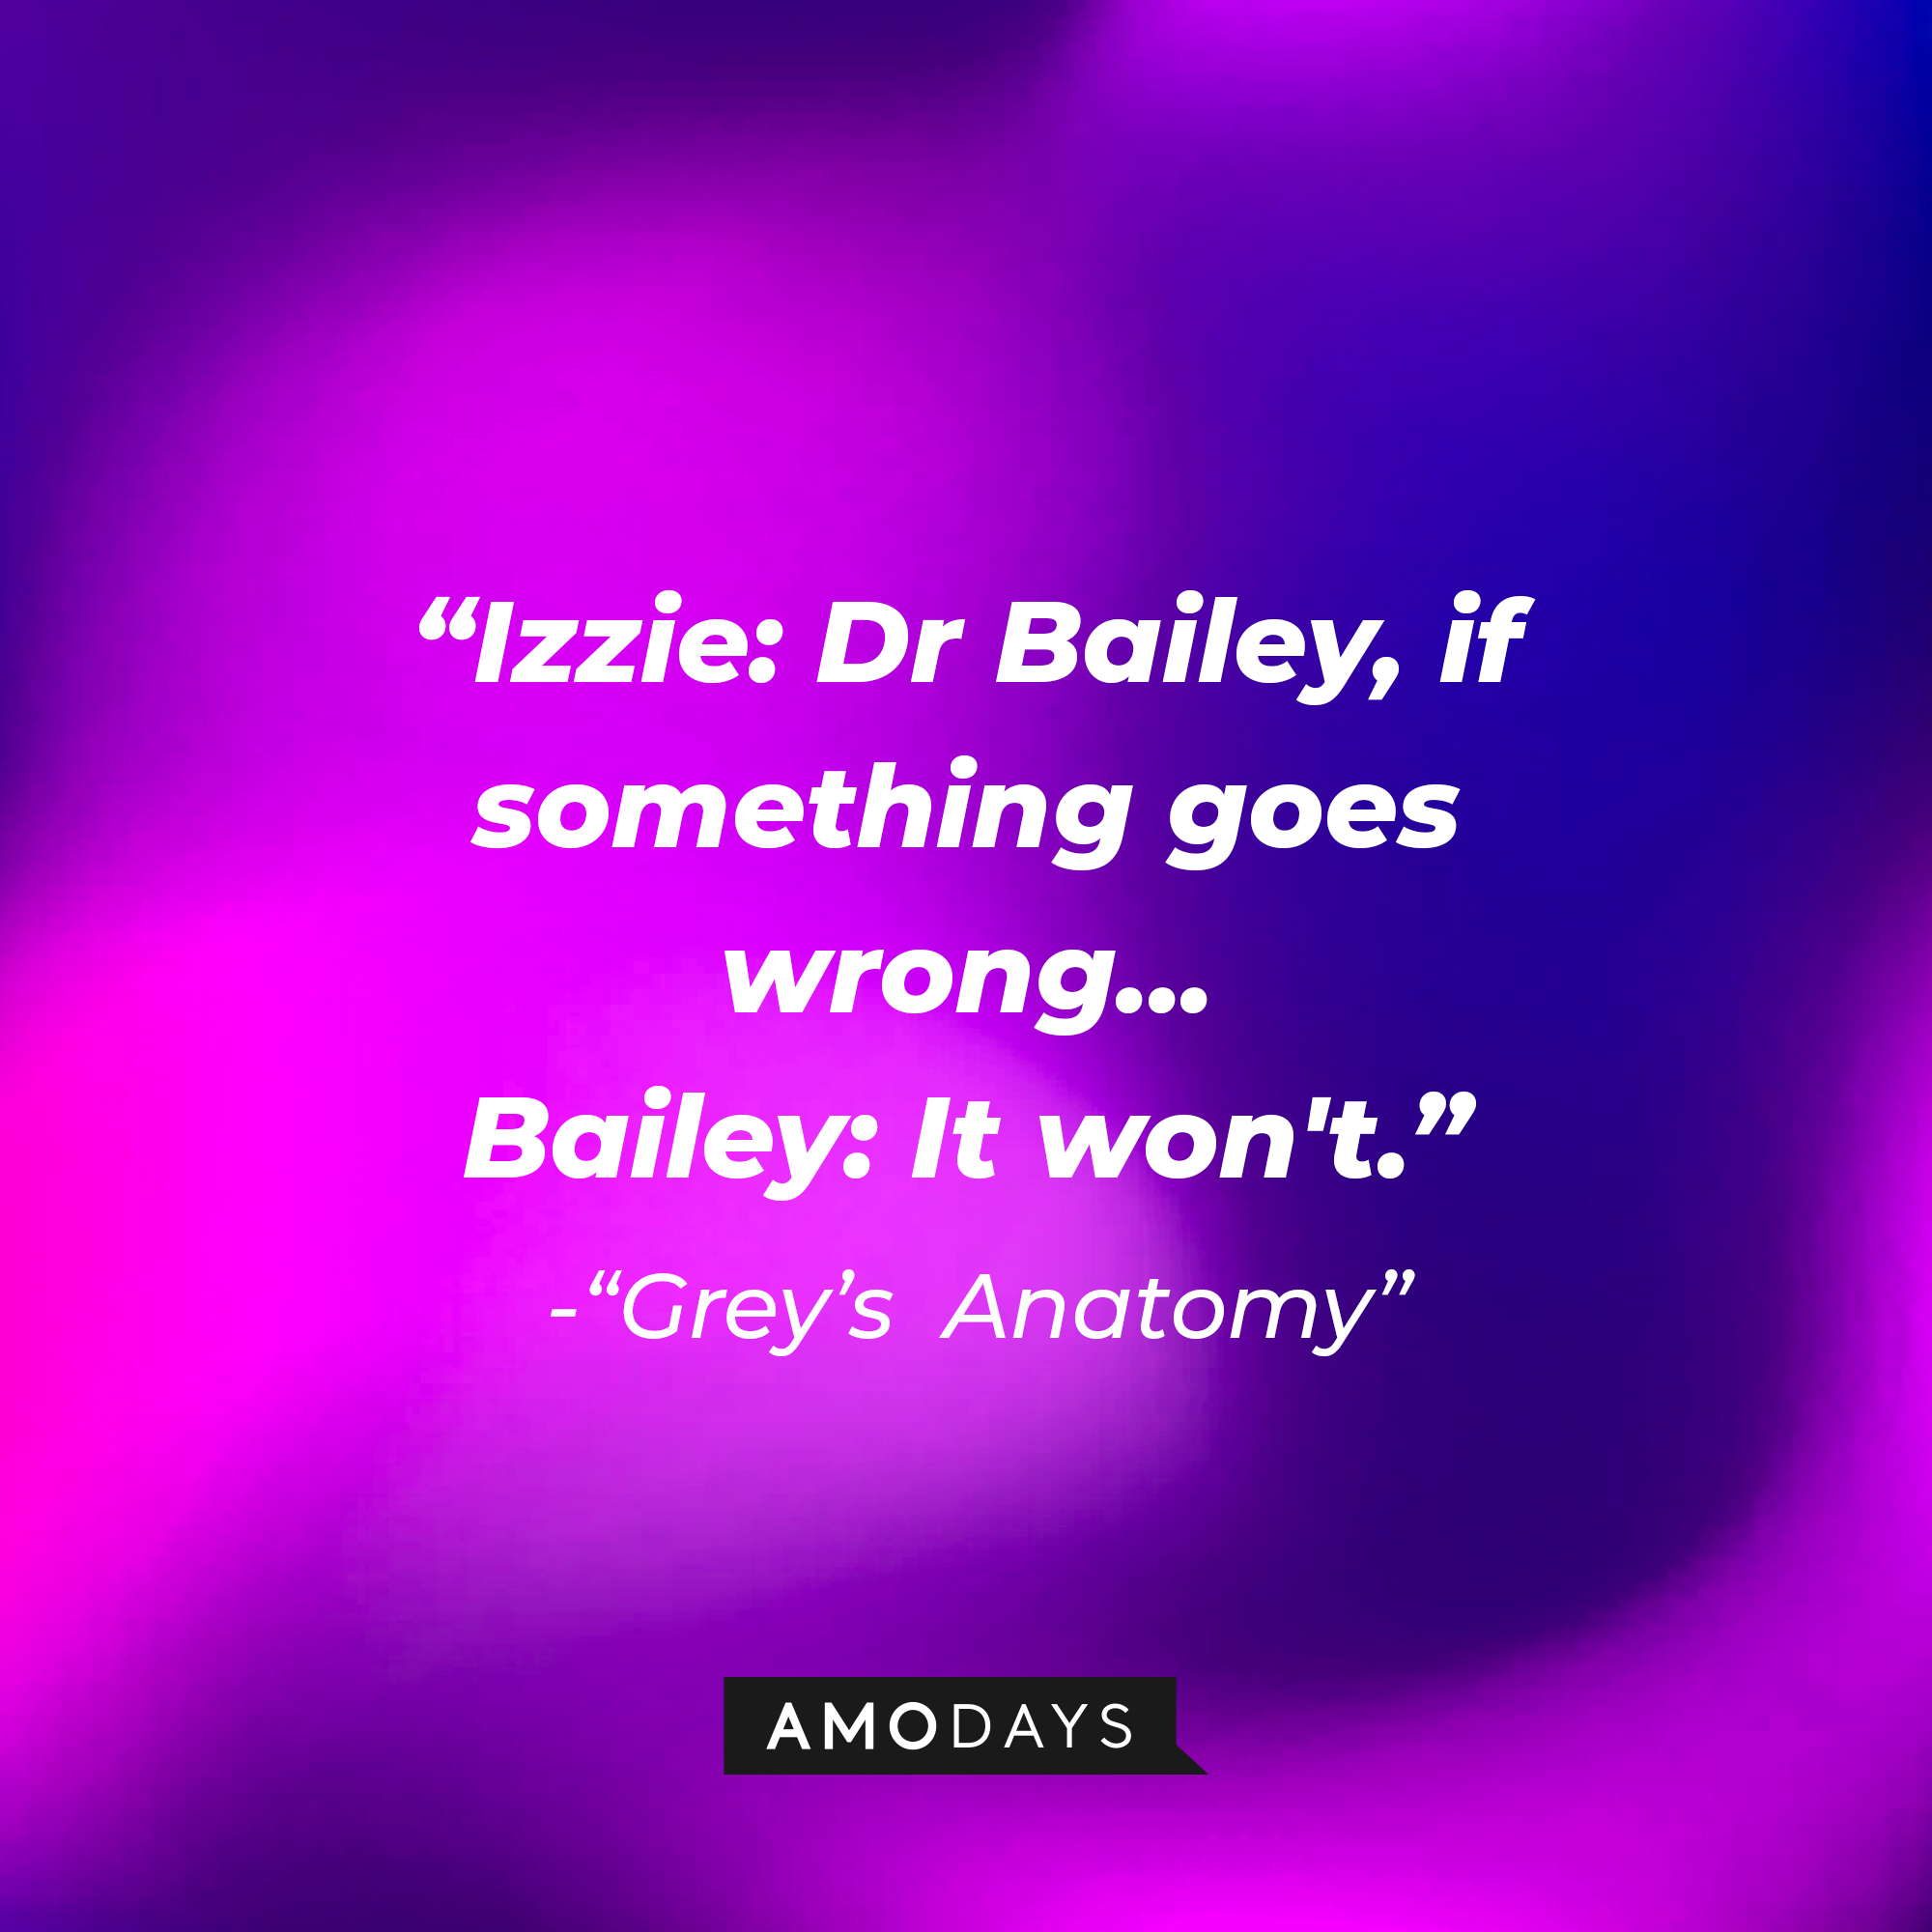 Izzie Stevens' quote: "Dr Bailey, if something goes wrong..." Bailey: "It won't." | Image: Amodays